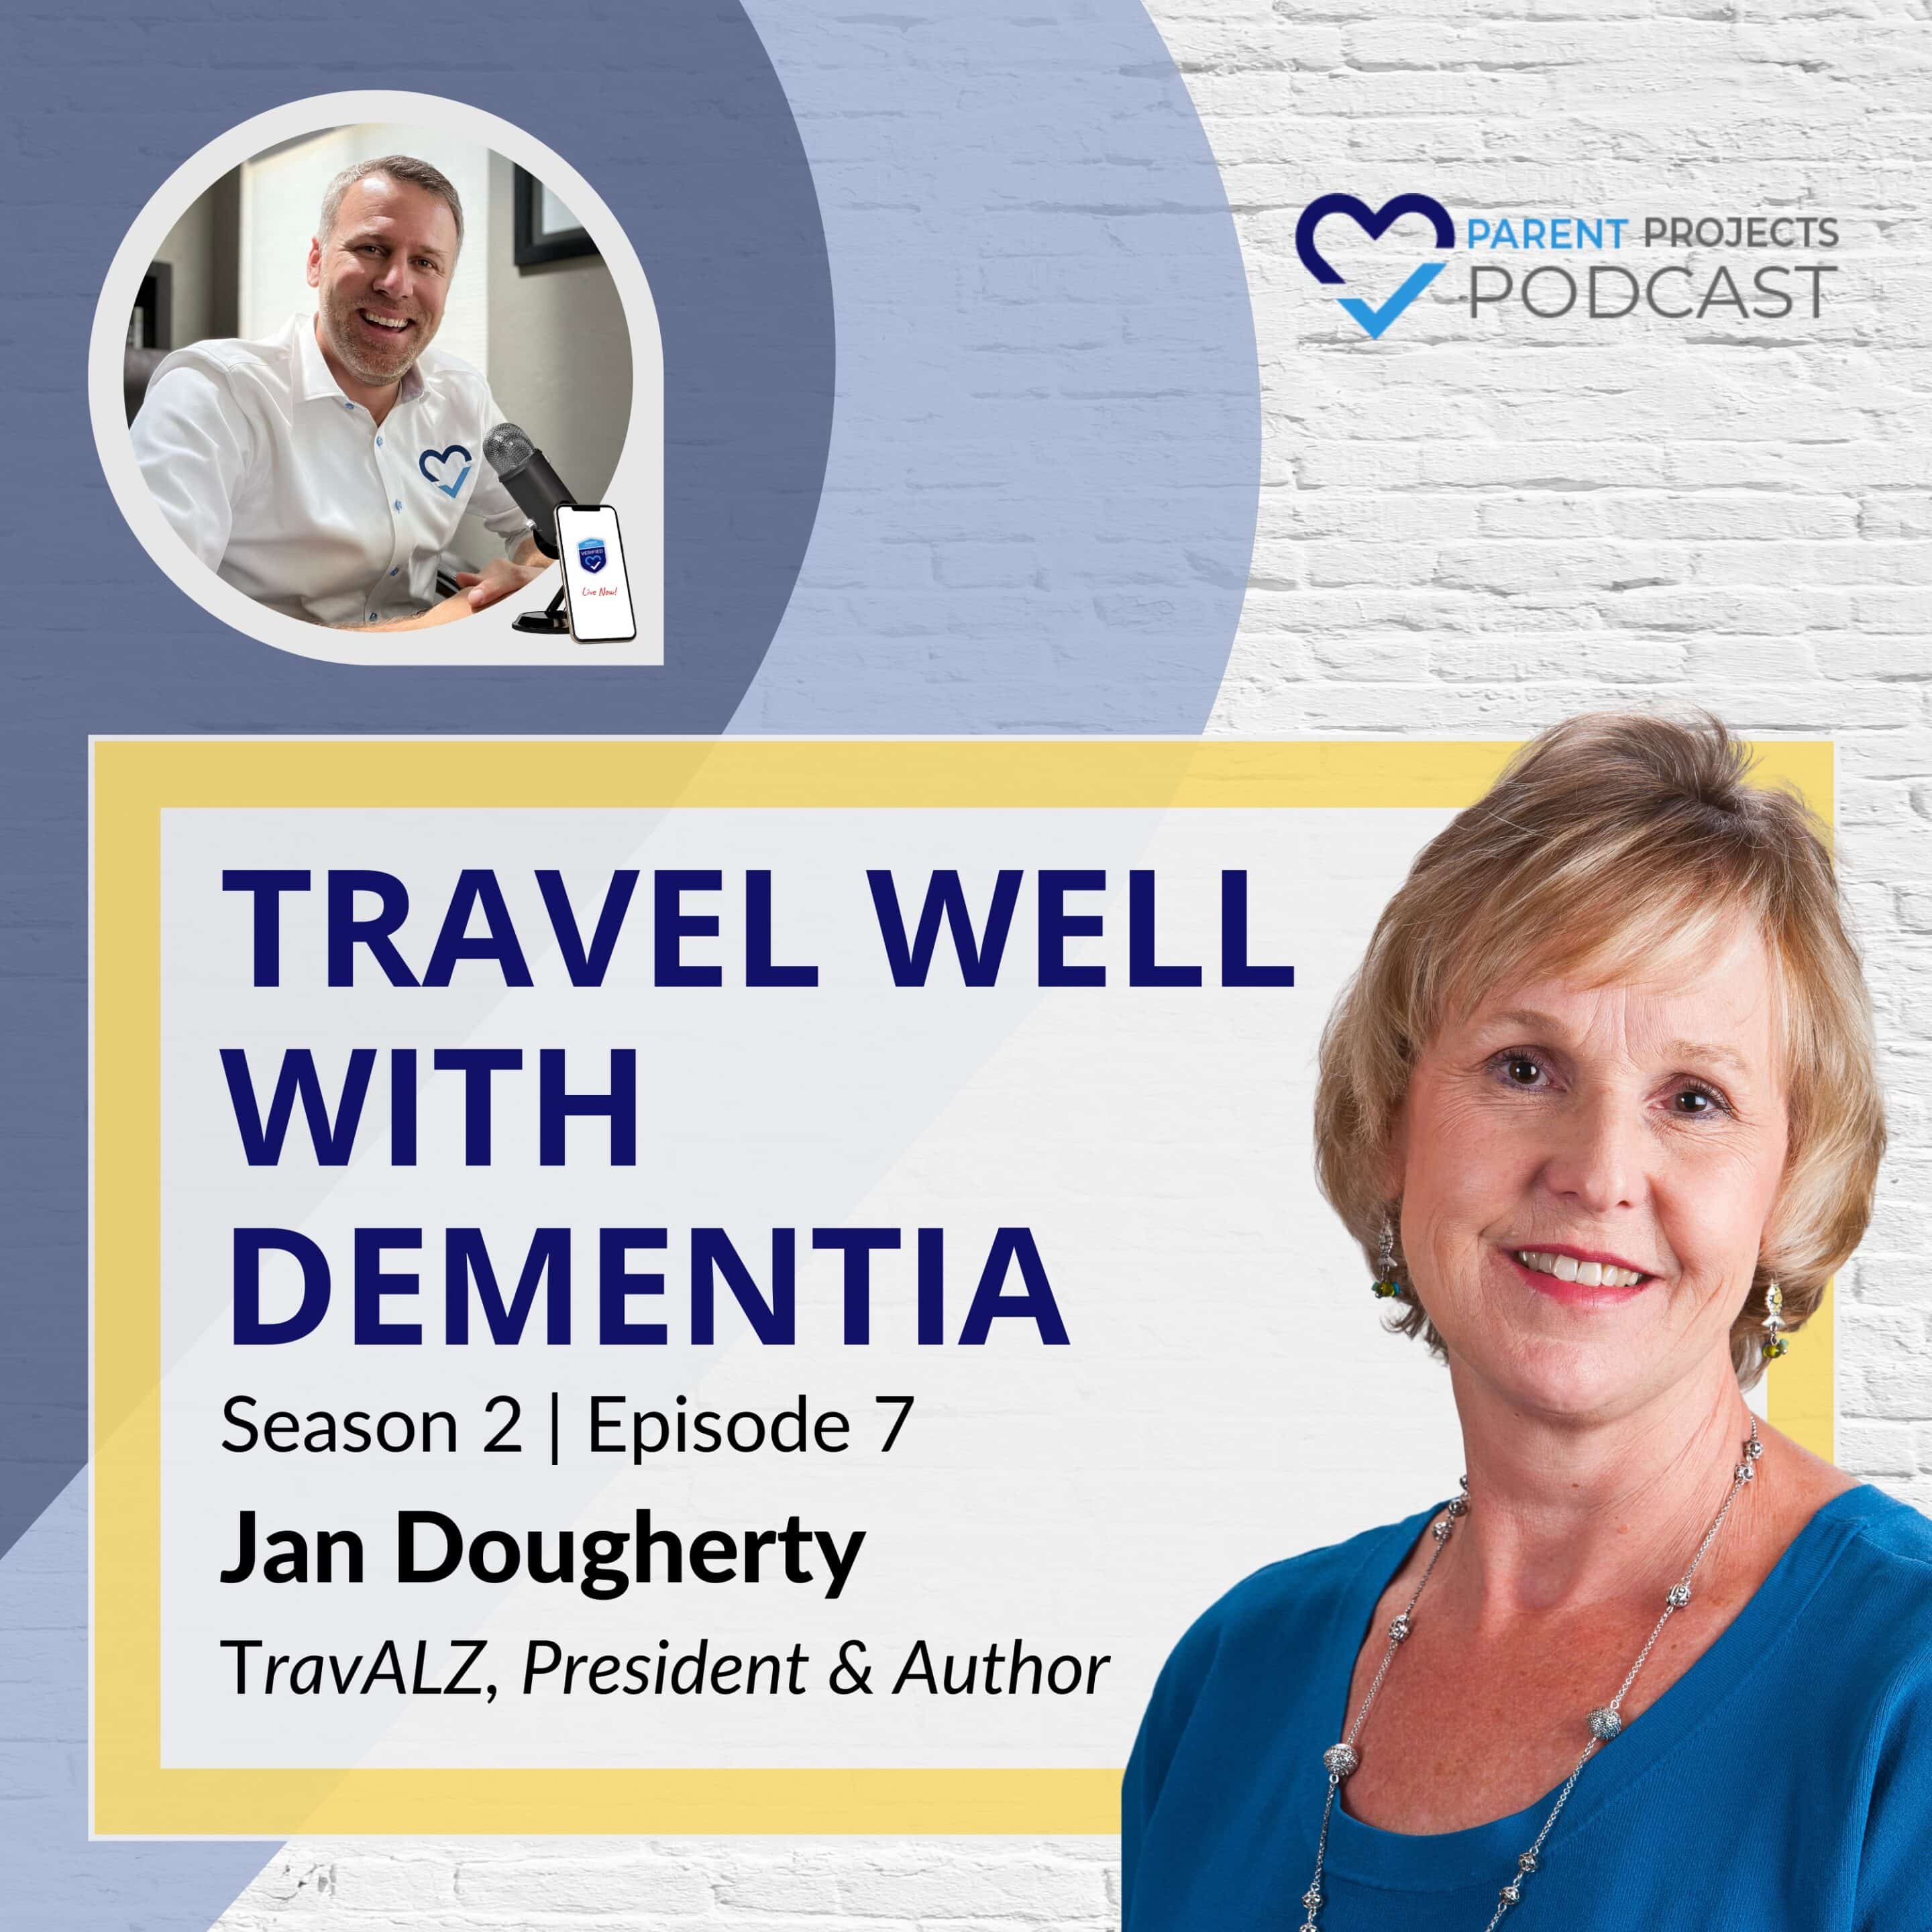 S2:E7 Jan Dougherty - Travel Well with Dementia